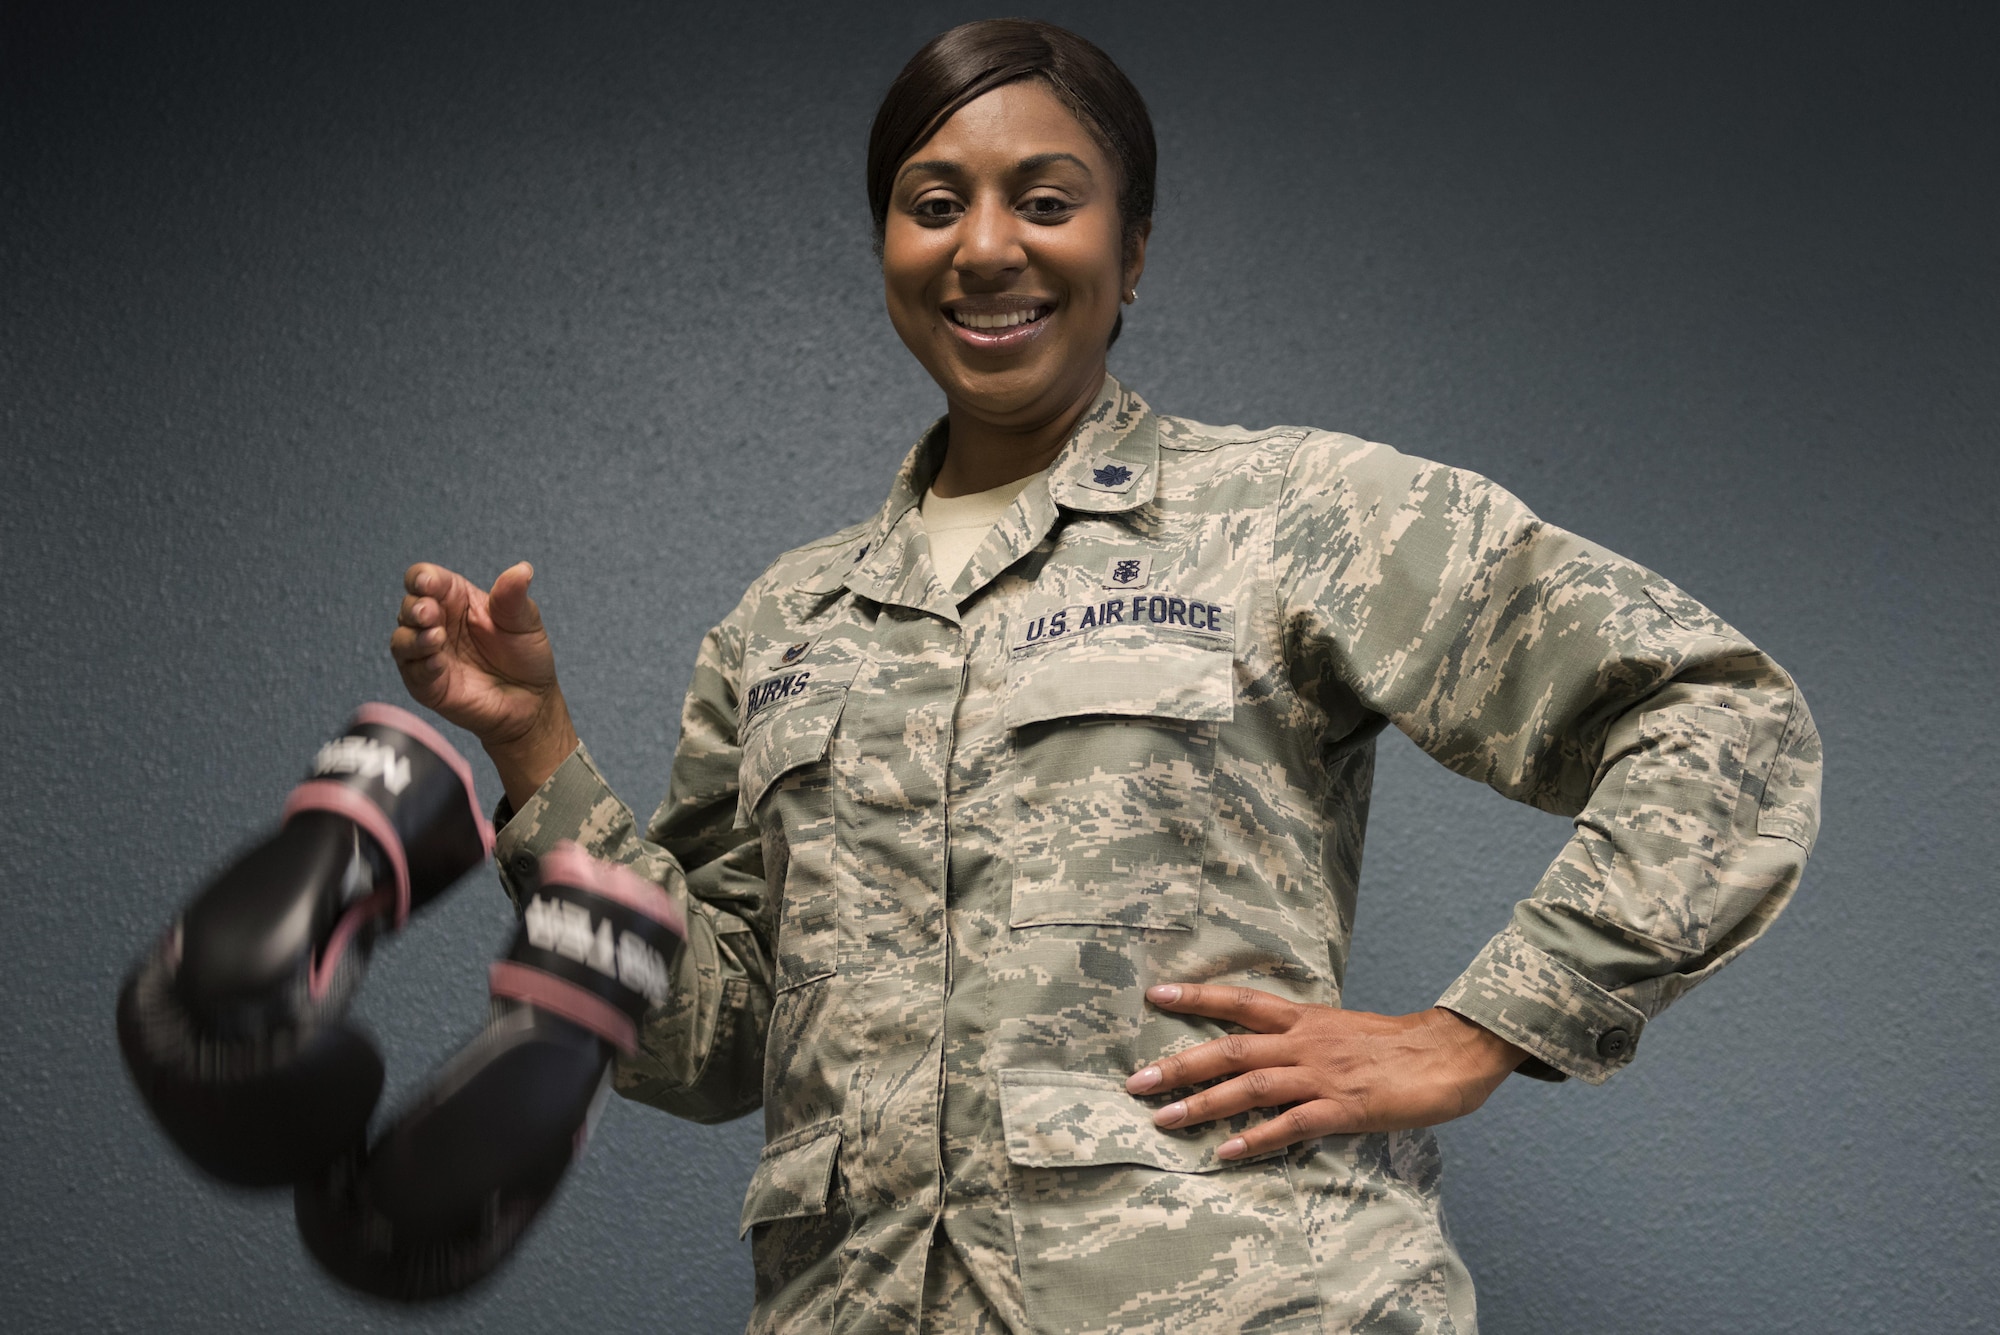 Lt. Col. Felicia Burks, the 92nd Medical Support Squadron commander, drops a pair of boxing gloves Oct. 21, 2016, at Fairchild Air Force Base, Wash. During her fight with cancer, Burks took up boxing as a way of staying physically fit. To her, the dropped gloves signify the end of her fight with cancer. (U.S. Air Force photo/Senior Airman Nick J. Daniello)